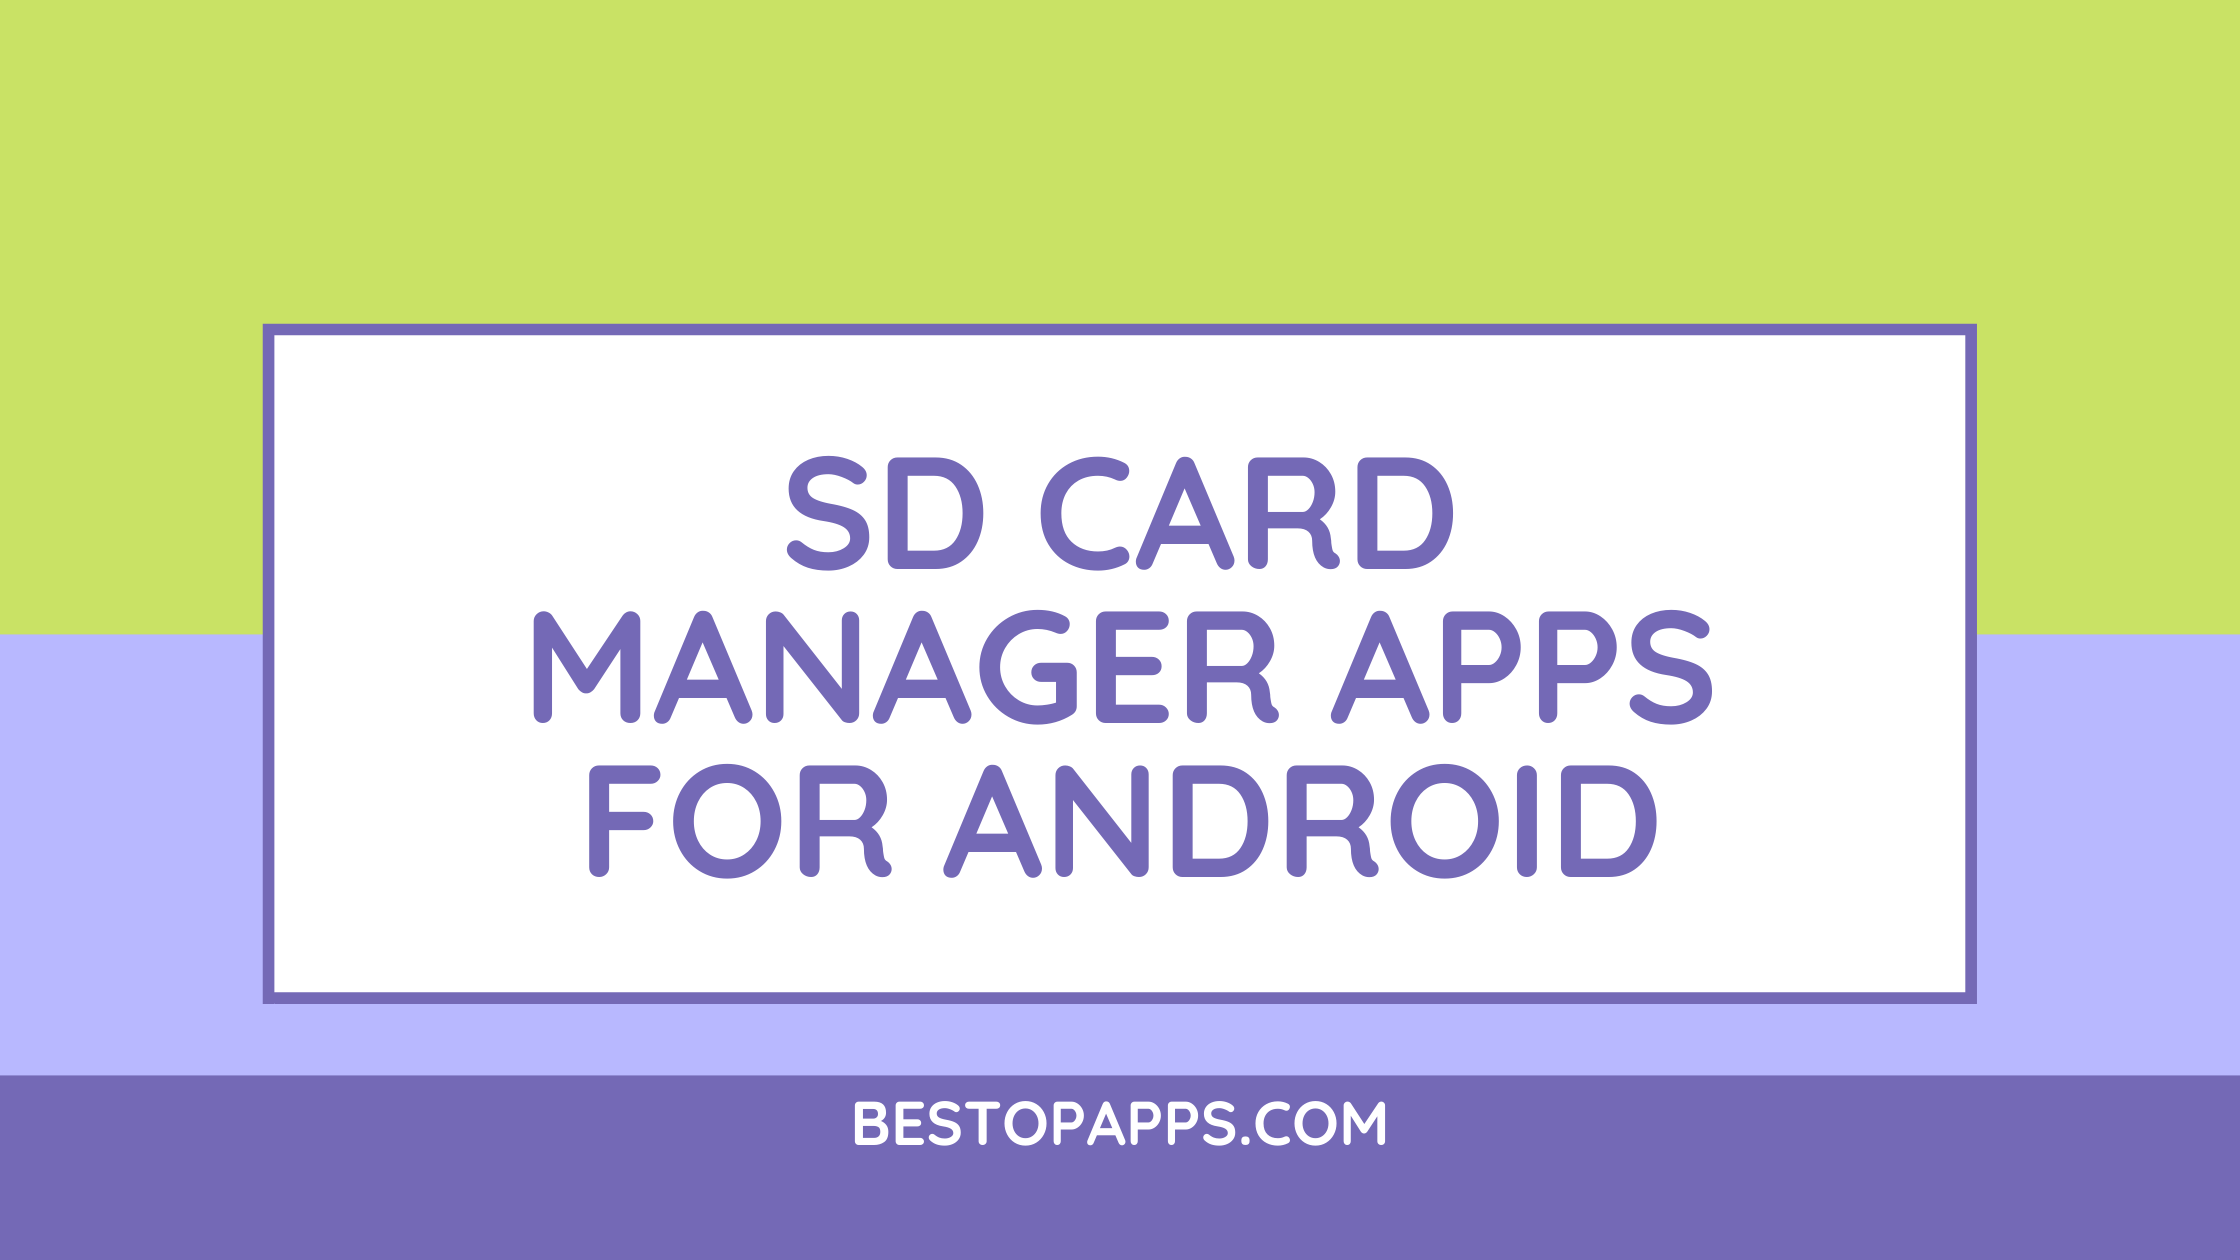 SD Card Manager Apps for Android